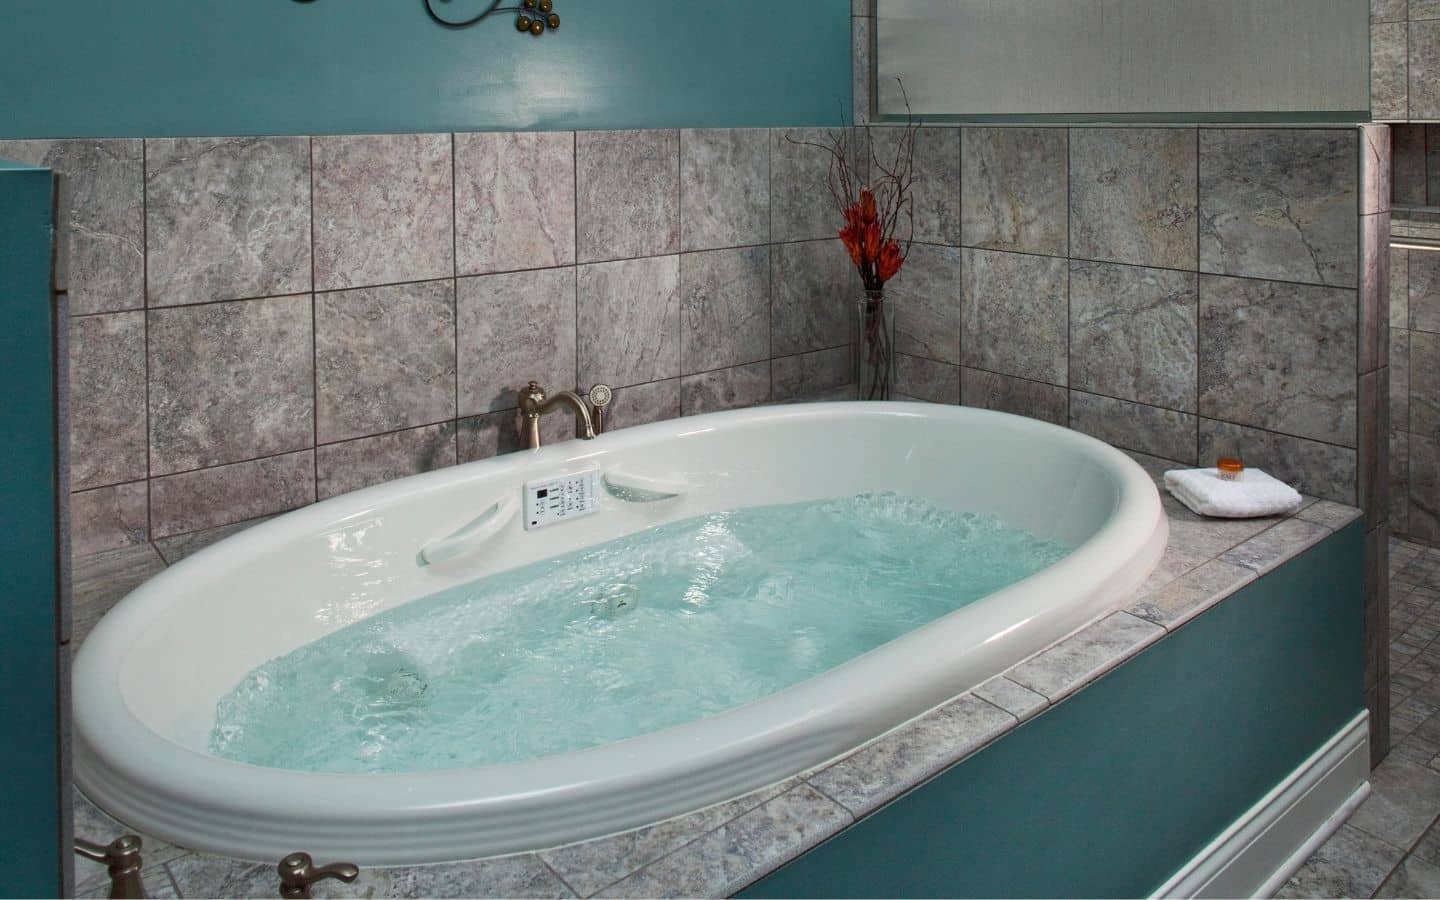 Guest bath with jets, aqua walls with tile and room for two